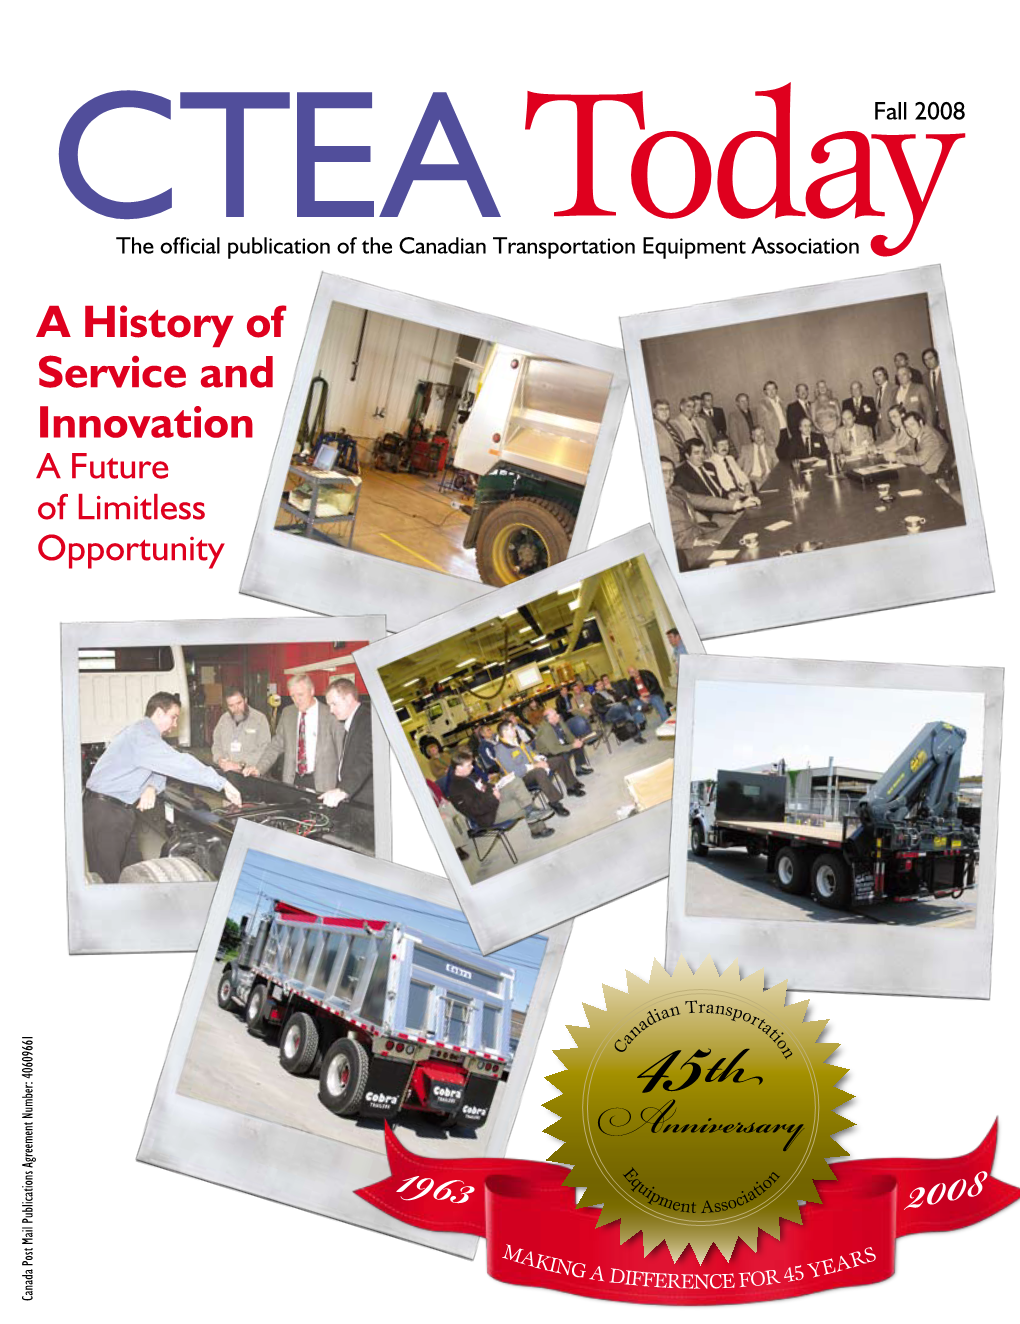 Cteathe Official Publication of the Canadian Transportationtoday Equipment Association a History of Service and Innovation a Future of Limitless Opportunity